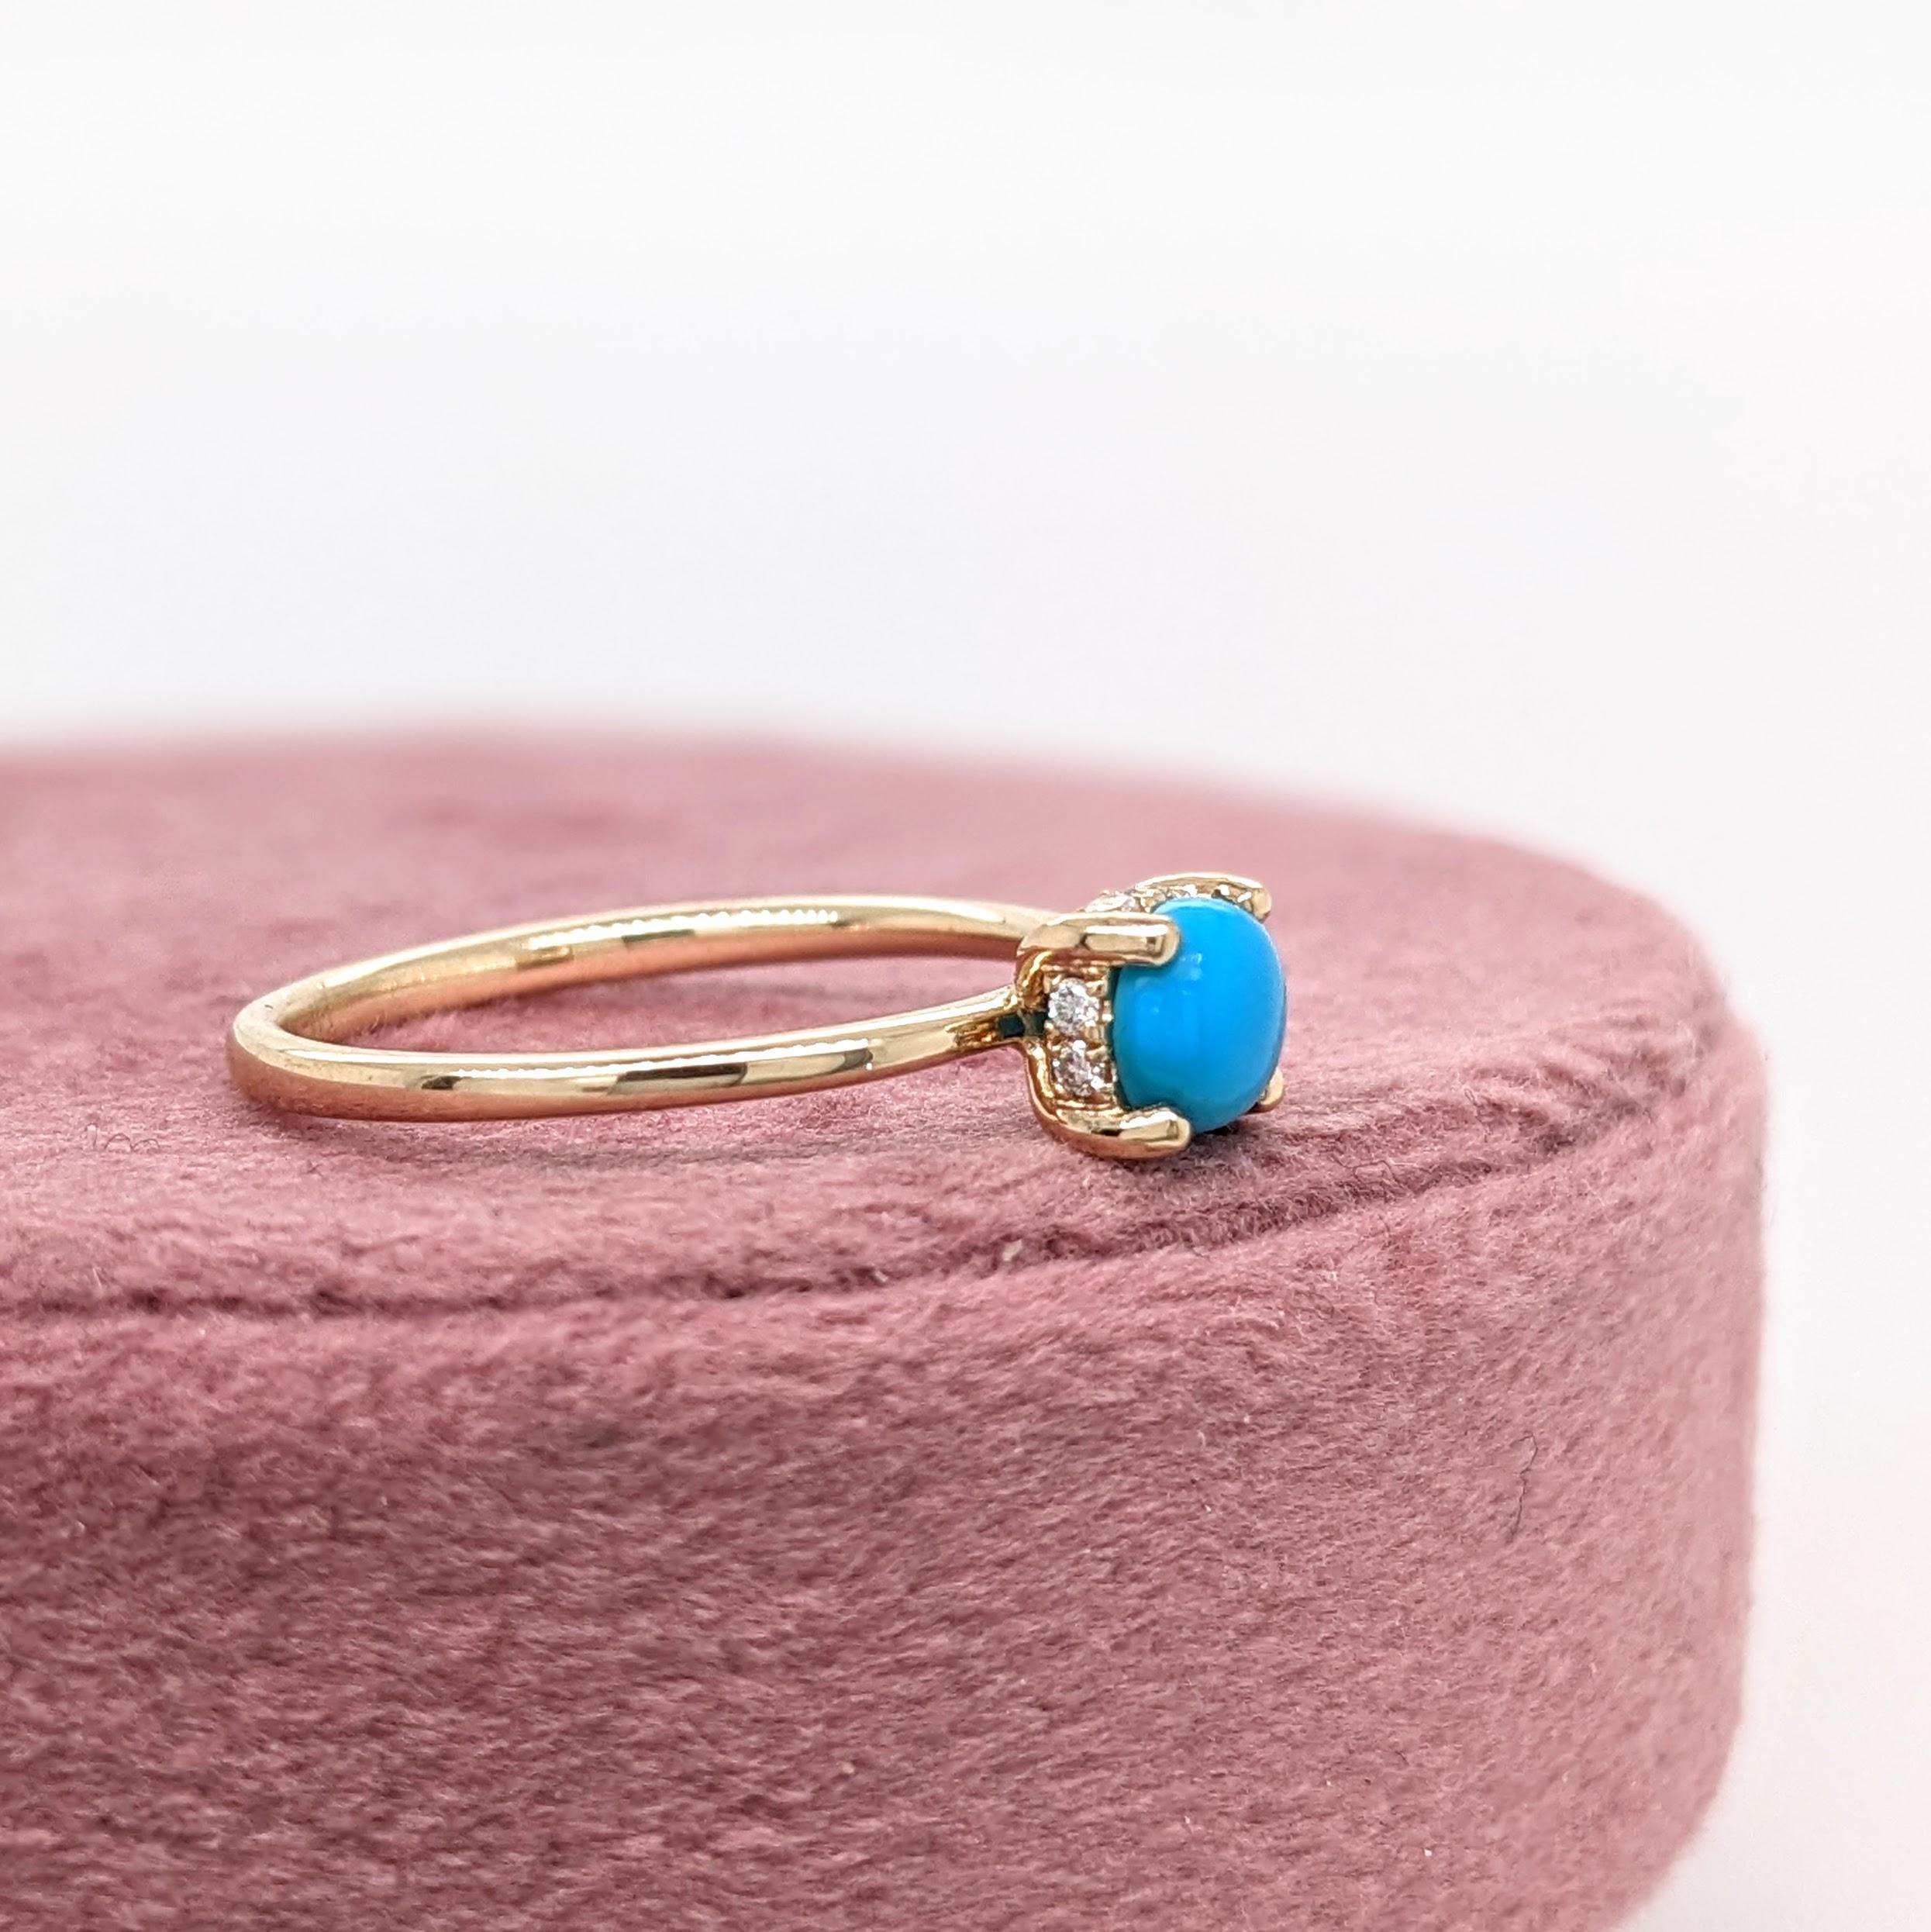 Turquoise Ring w Earth Mined Diamonds in Solid 14K Yellow Gold Round 5mm For Sale 2